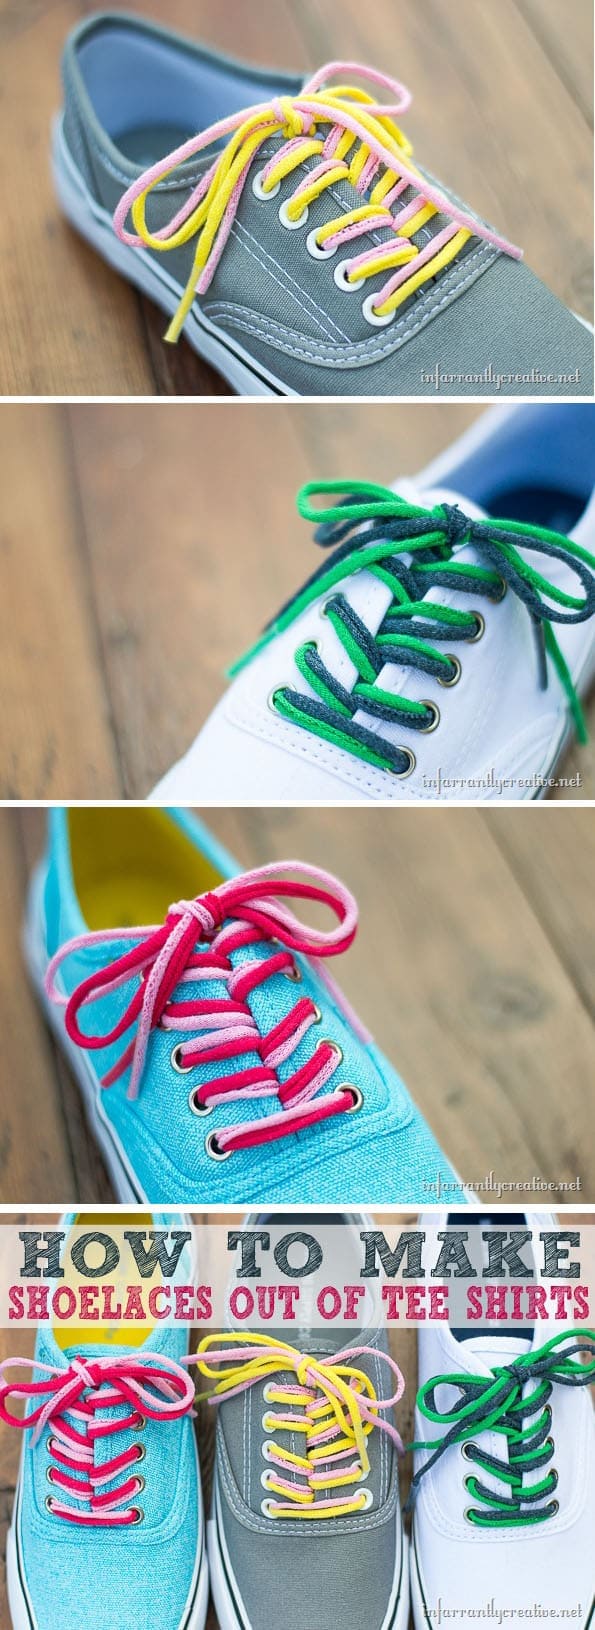 Learn to make shoelaces from t-shirt yarn at TidyMom.net This is especially fun to show off school colors or to coordinate your shoelaces with a certain outfit.